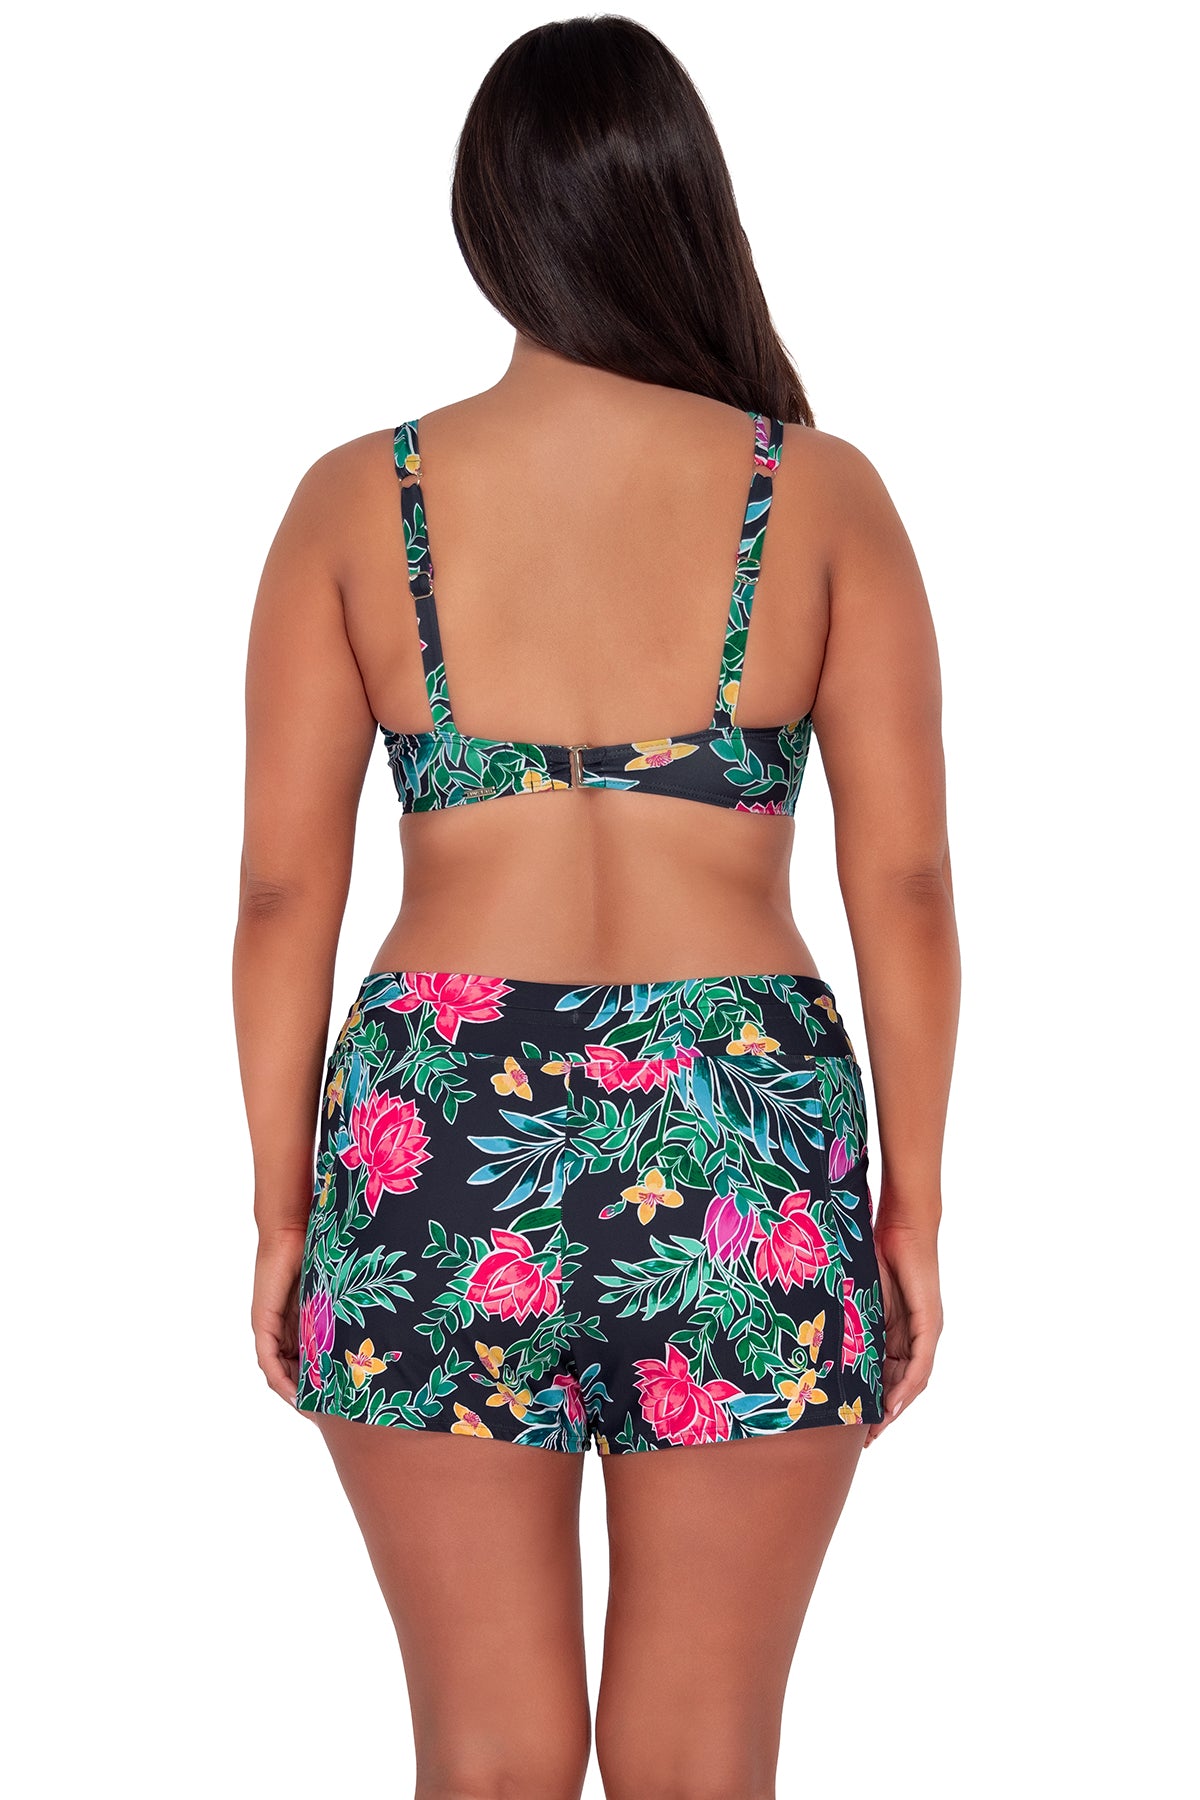 Back pose #1 of Nicki wearing Sunsets Twilight Blooms Taylor Bralette Top paired with Laguna Swim Short women's casual wear